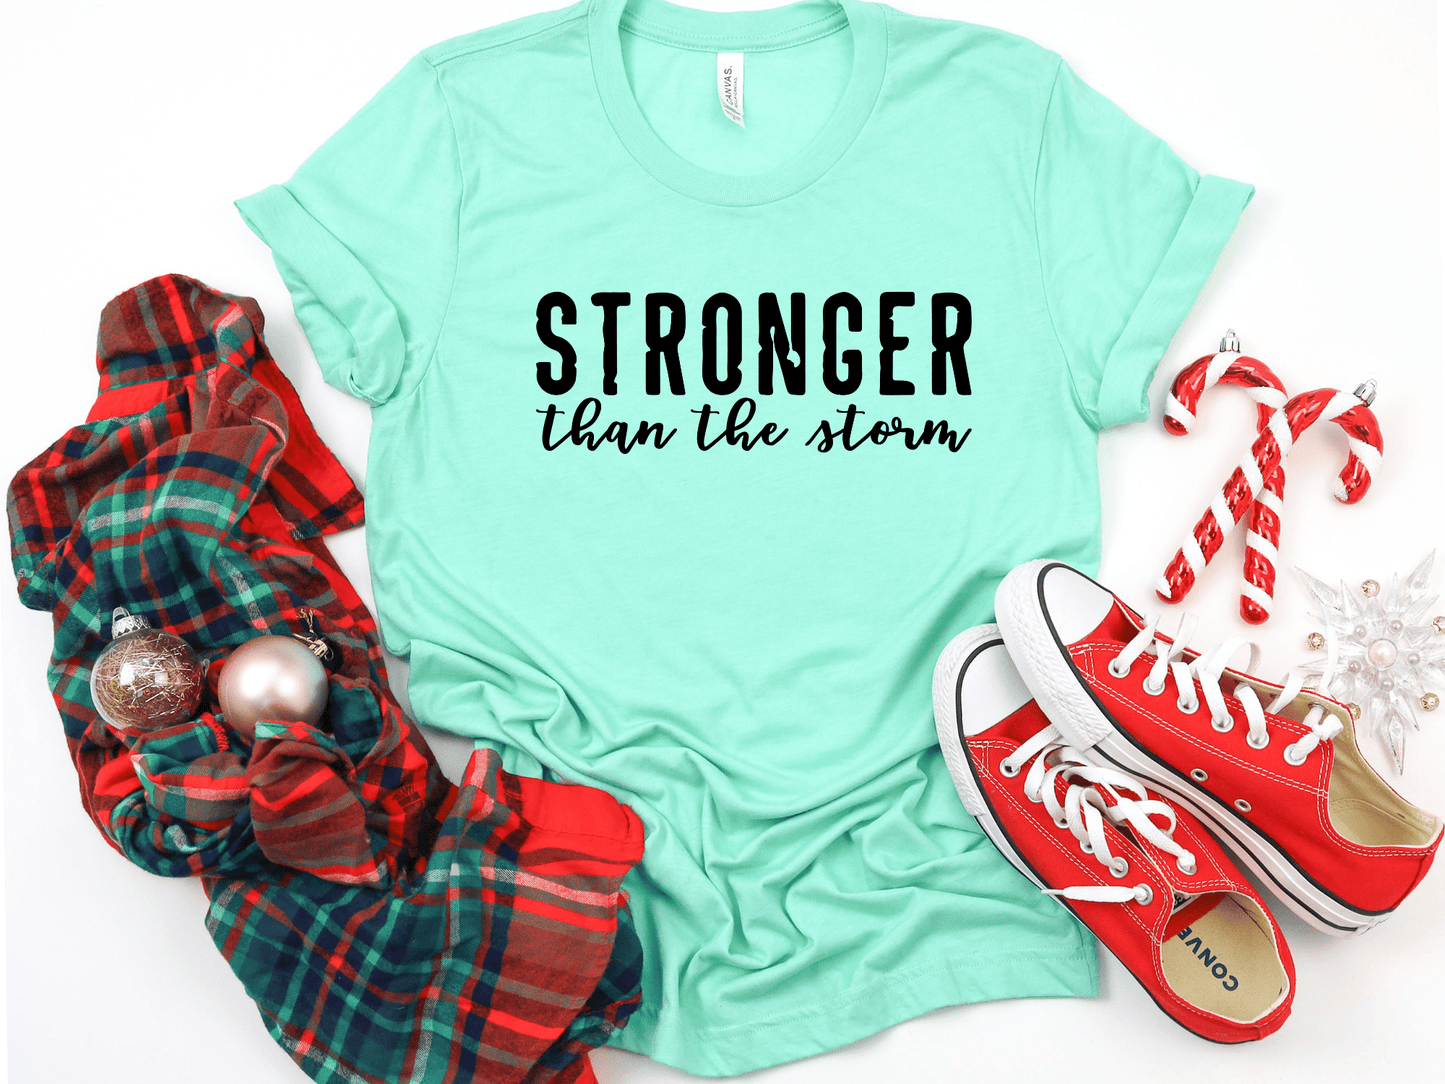 Stronger Than The Storm in Black Inspirational Graphic Tee